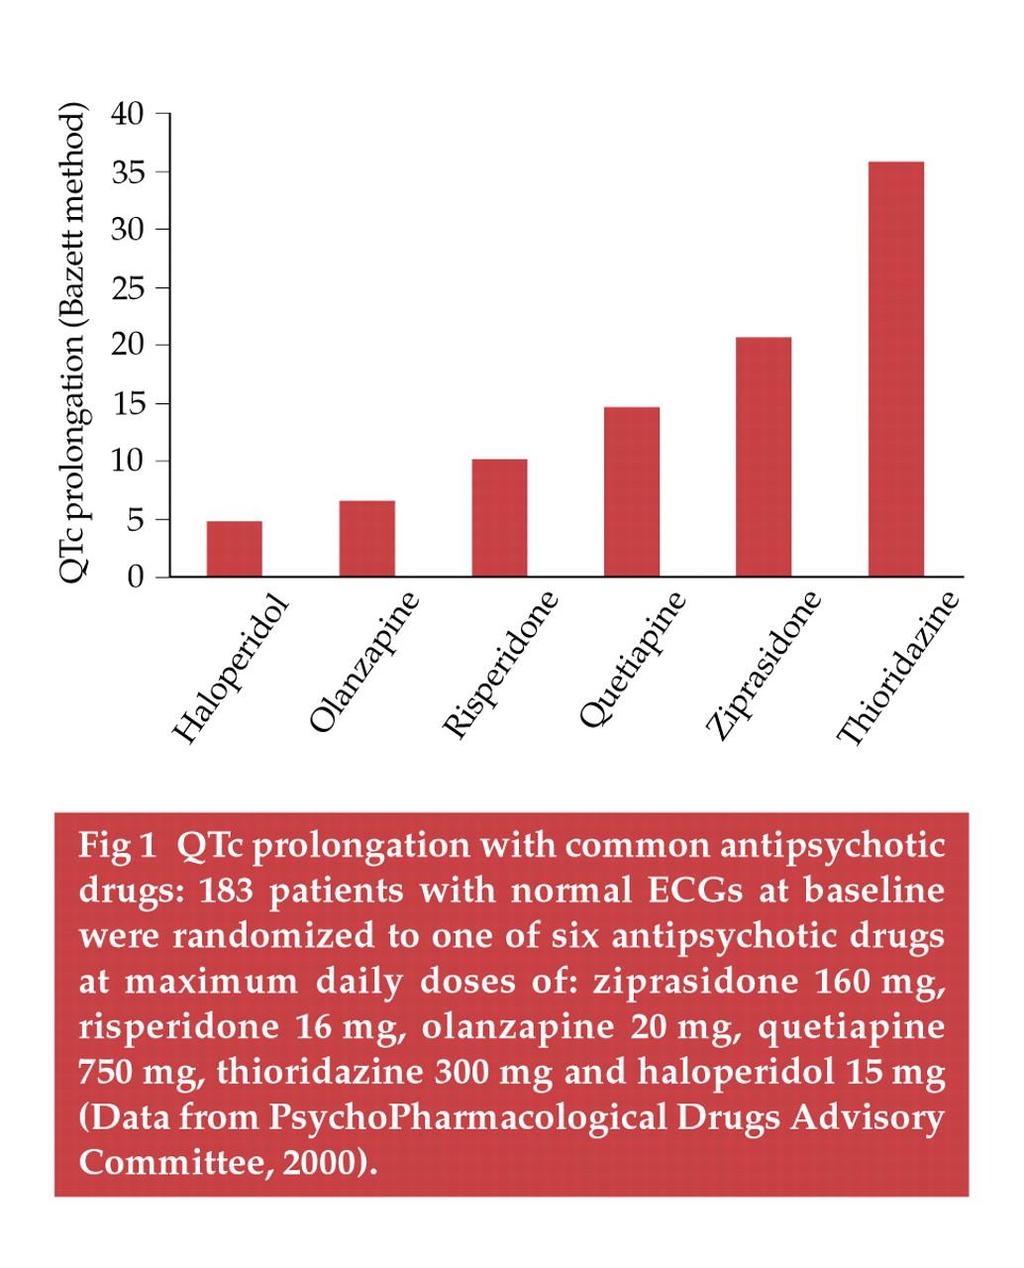 QTc prolongation with common antipsychotic drugs: 183 patients with normal ECGs at baseline were randomized to one of six antipsychotic drugs at maximum daily doses of: ziprasidone